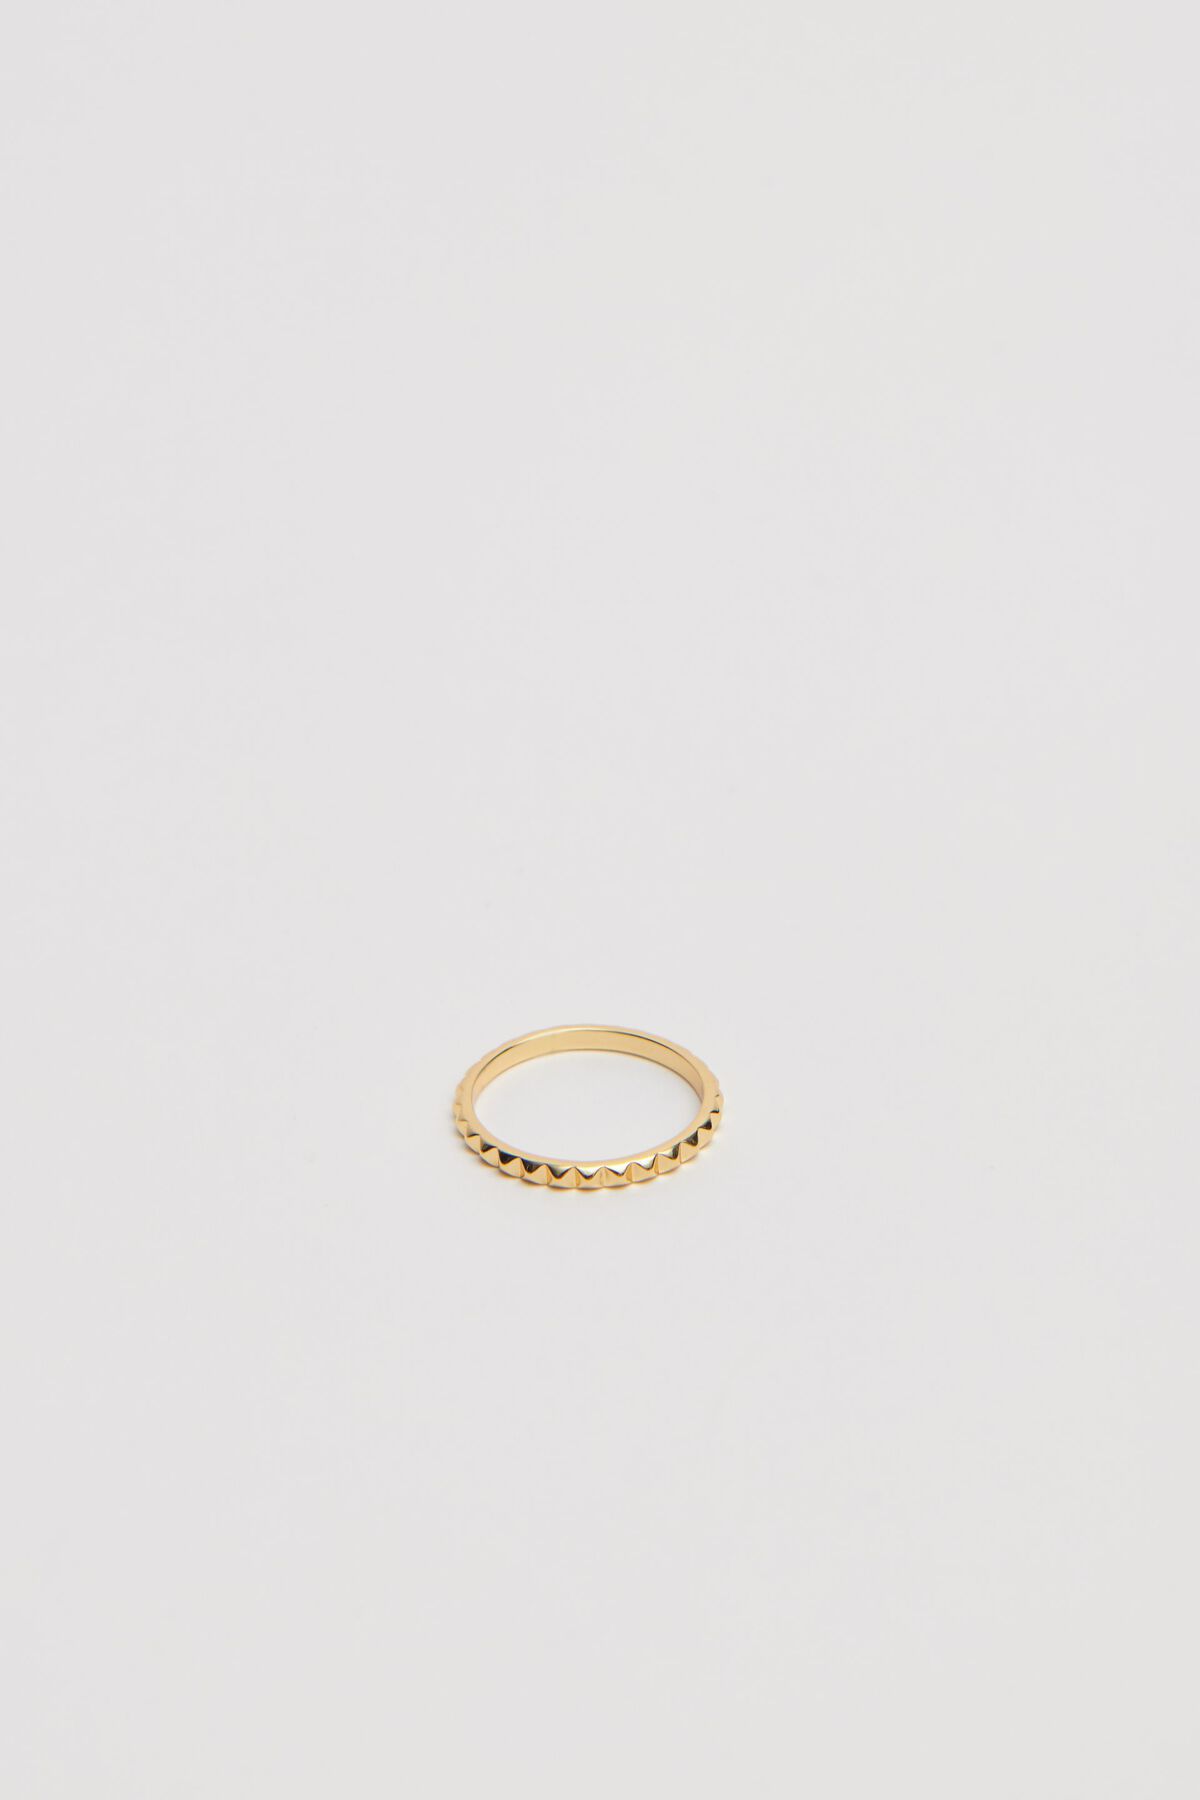 Garage 14K Gold Plated Micro Studded Ring. 1